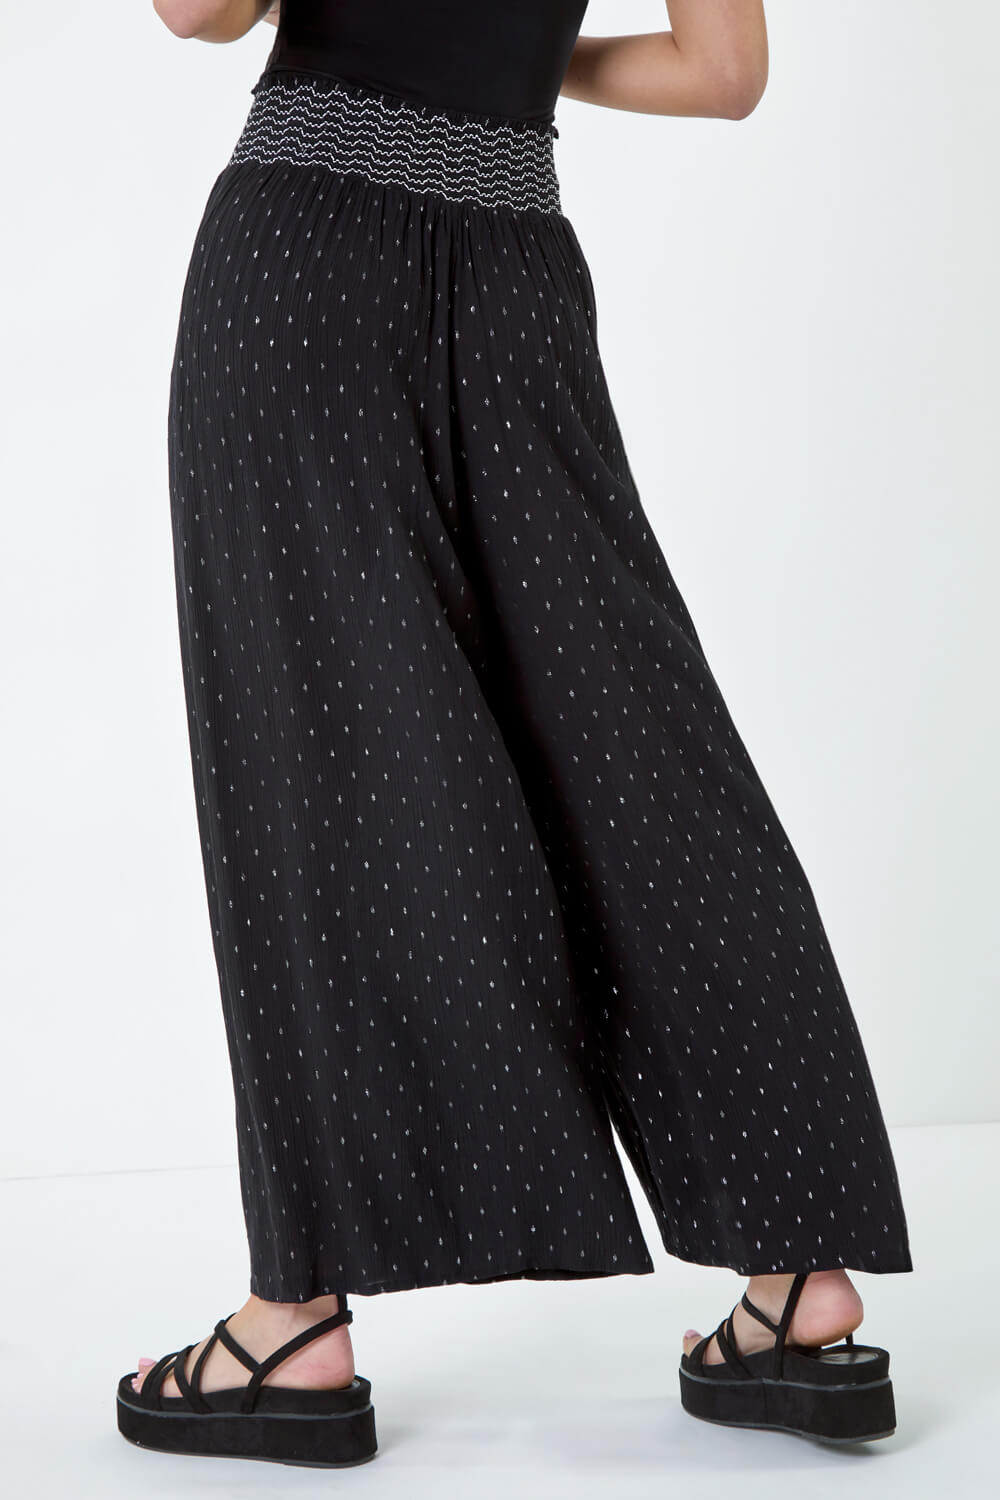 Black Shimmer Stretch Shirrred Wide Leg Trousers, Image 3 of 5